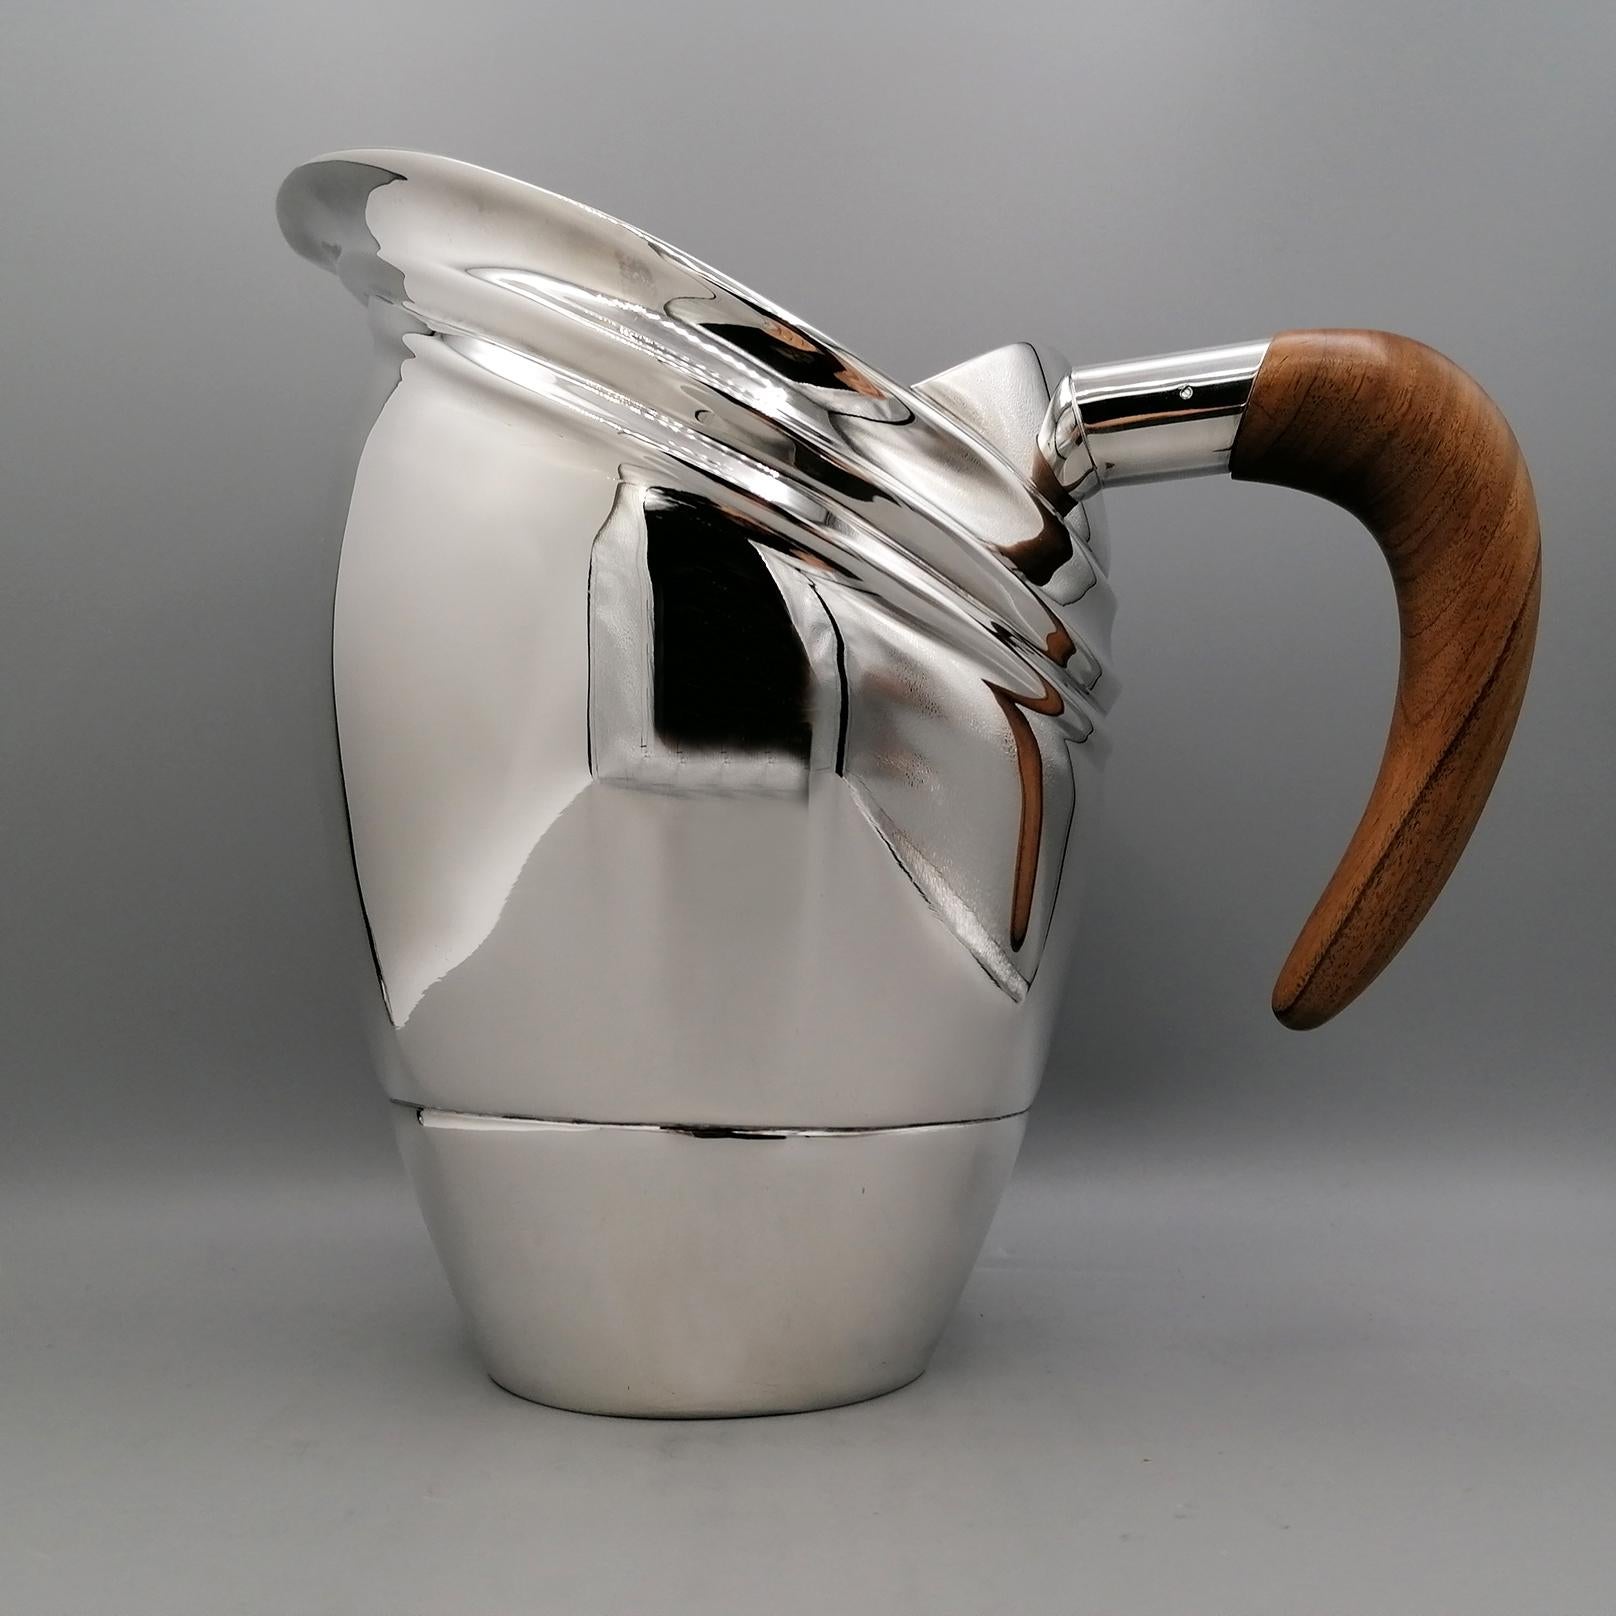 Water jug in 925 Sterling silver in art deco style completely handmade.
The body of the jug is smooth round, interspersed near the base with a groove to ensure its sturdiness.
The mouth of the jug is oblique with cantilevered ribs which lighten the